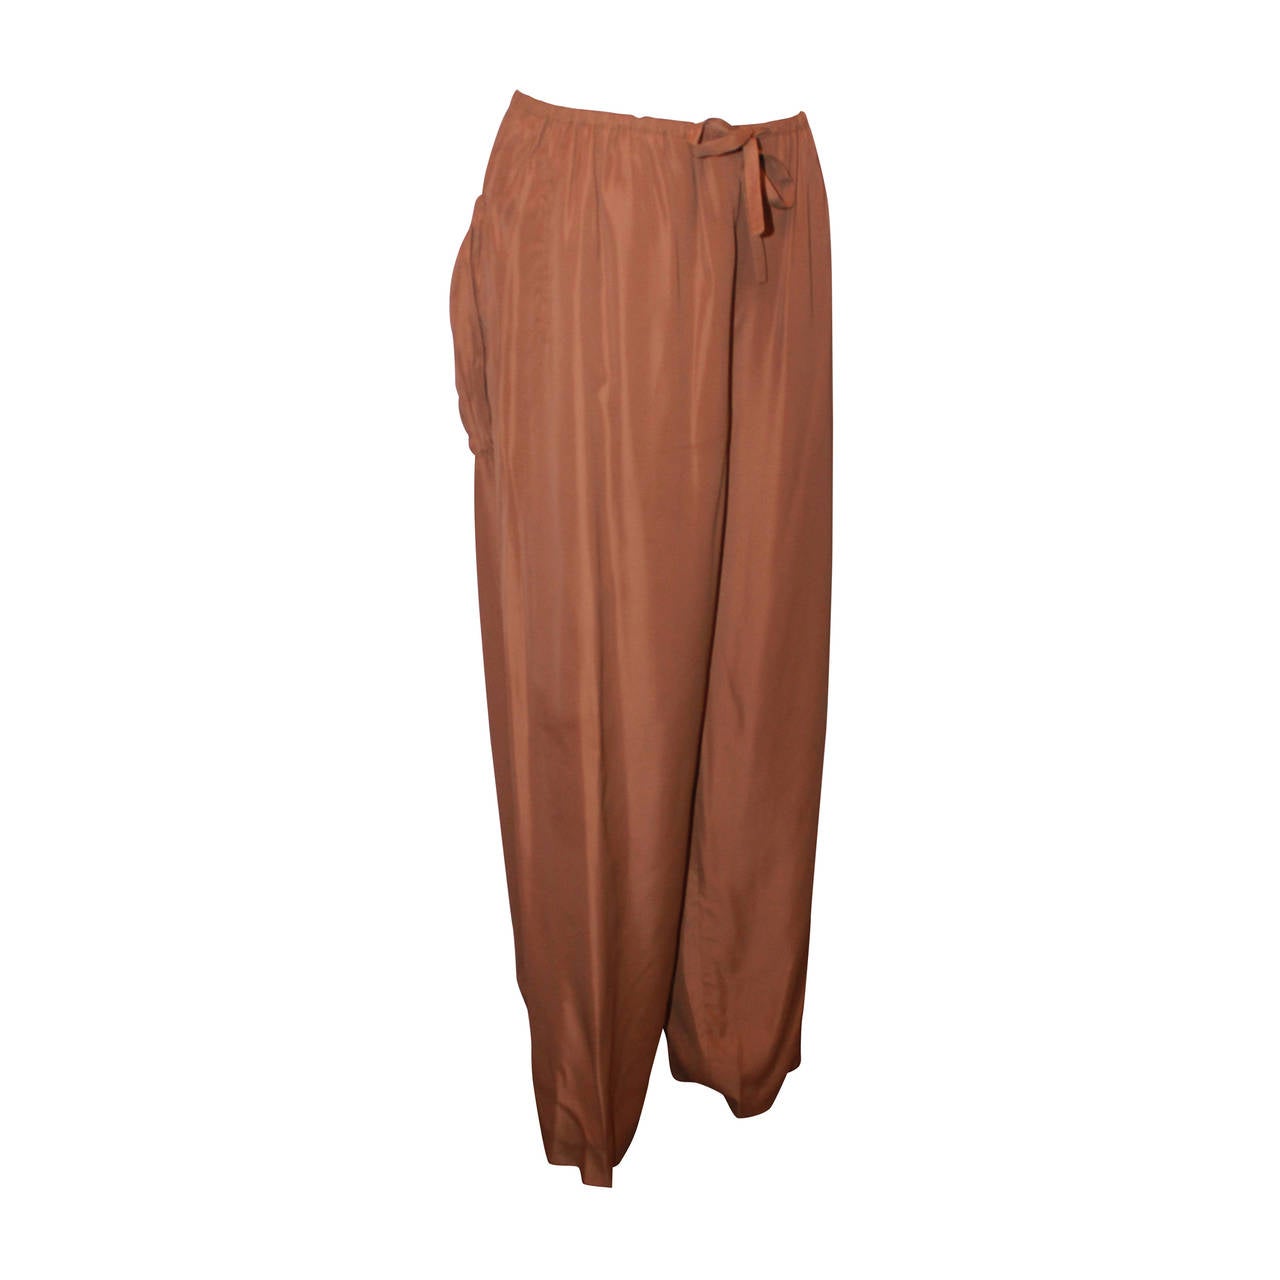 Jean Paul Gaultier 2000s Brown Drawstring Palazzo Pants with Scrunch Pockets - 8